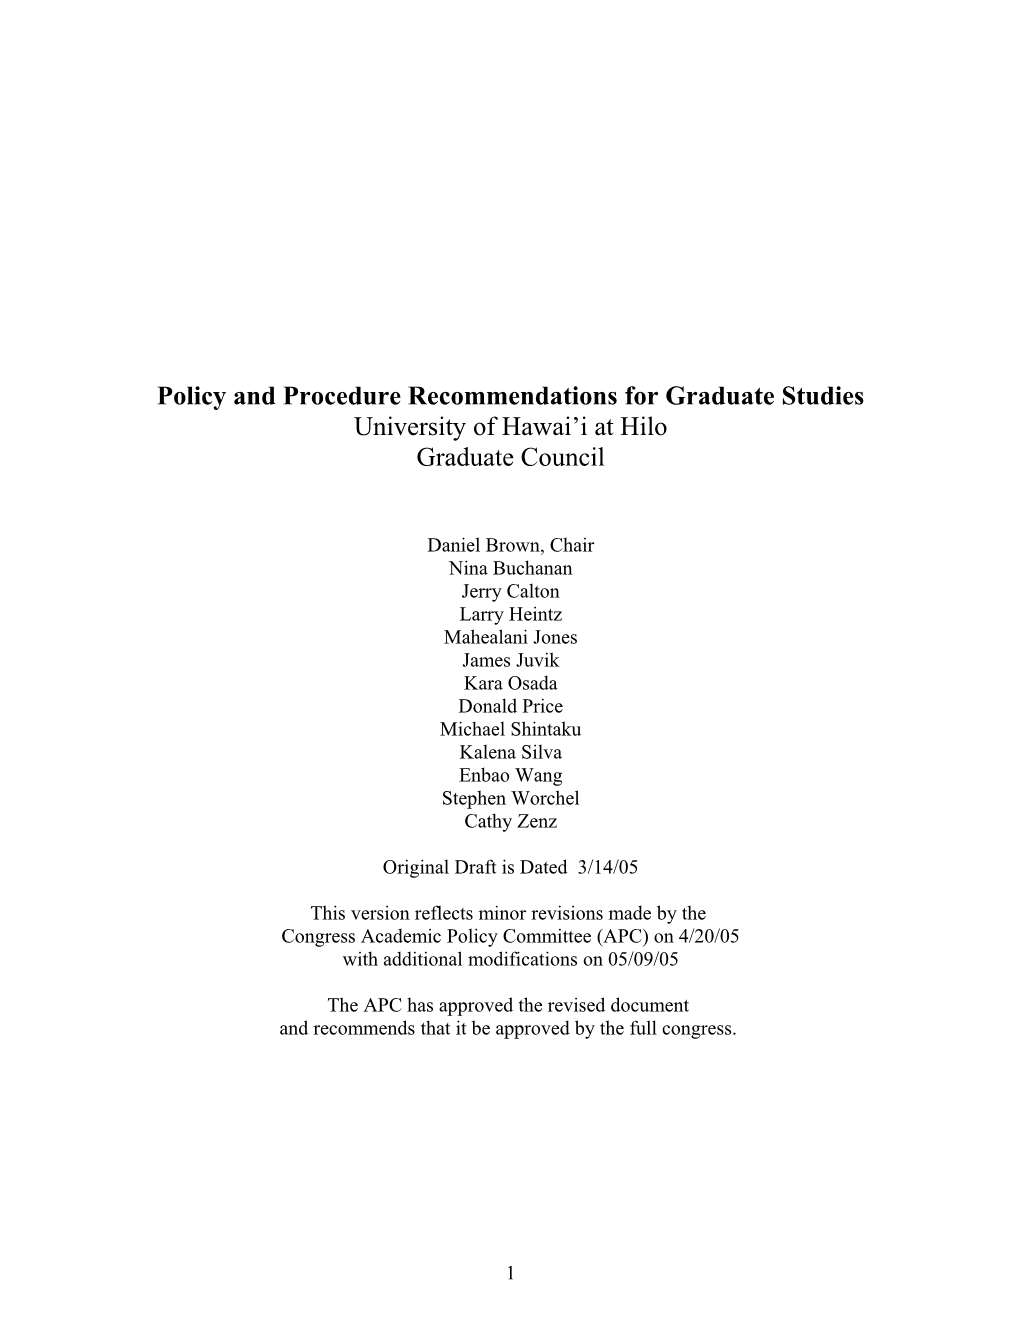 Policy and Procedure Recommendations for Graduate Studies